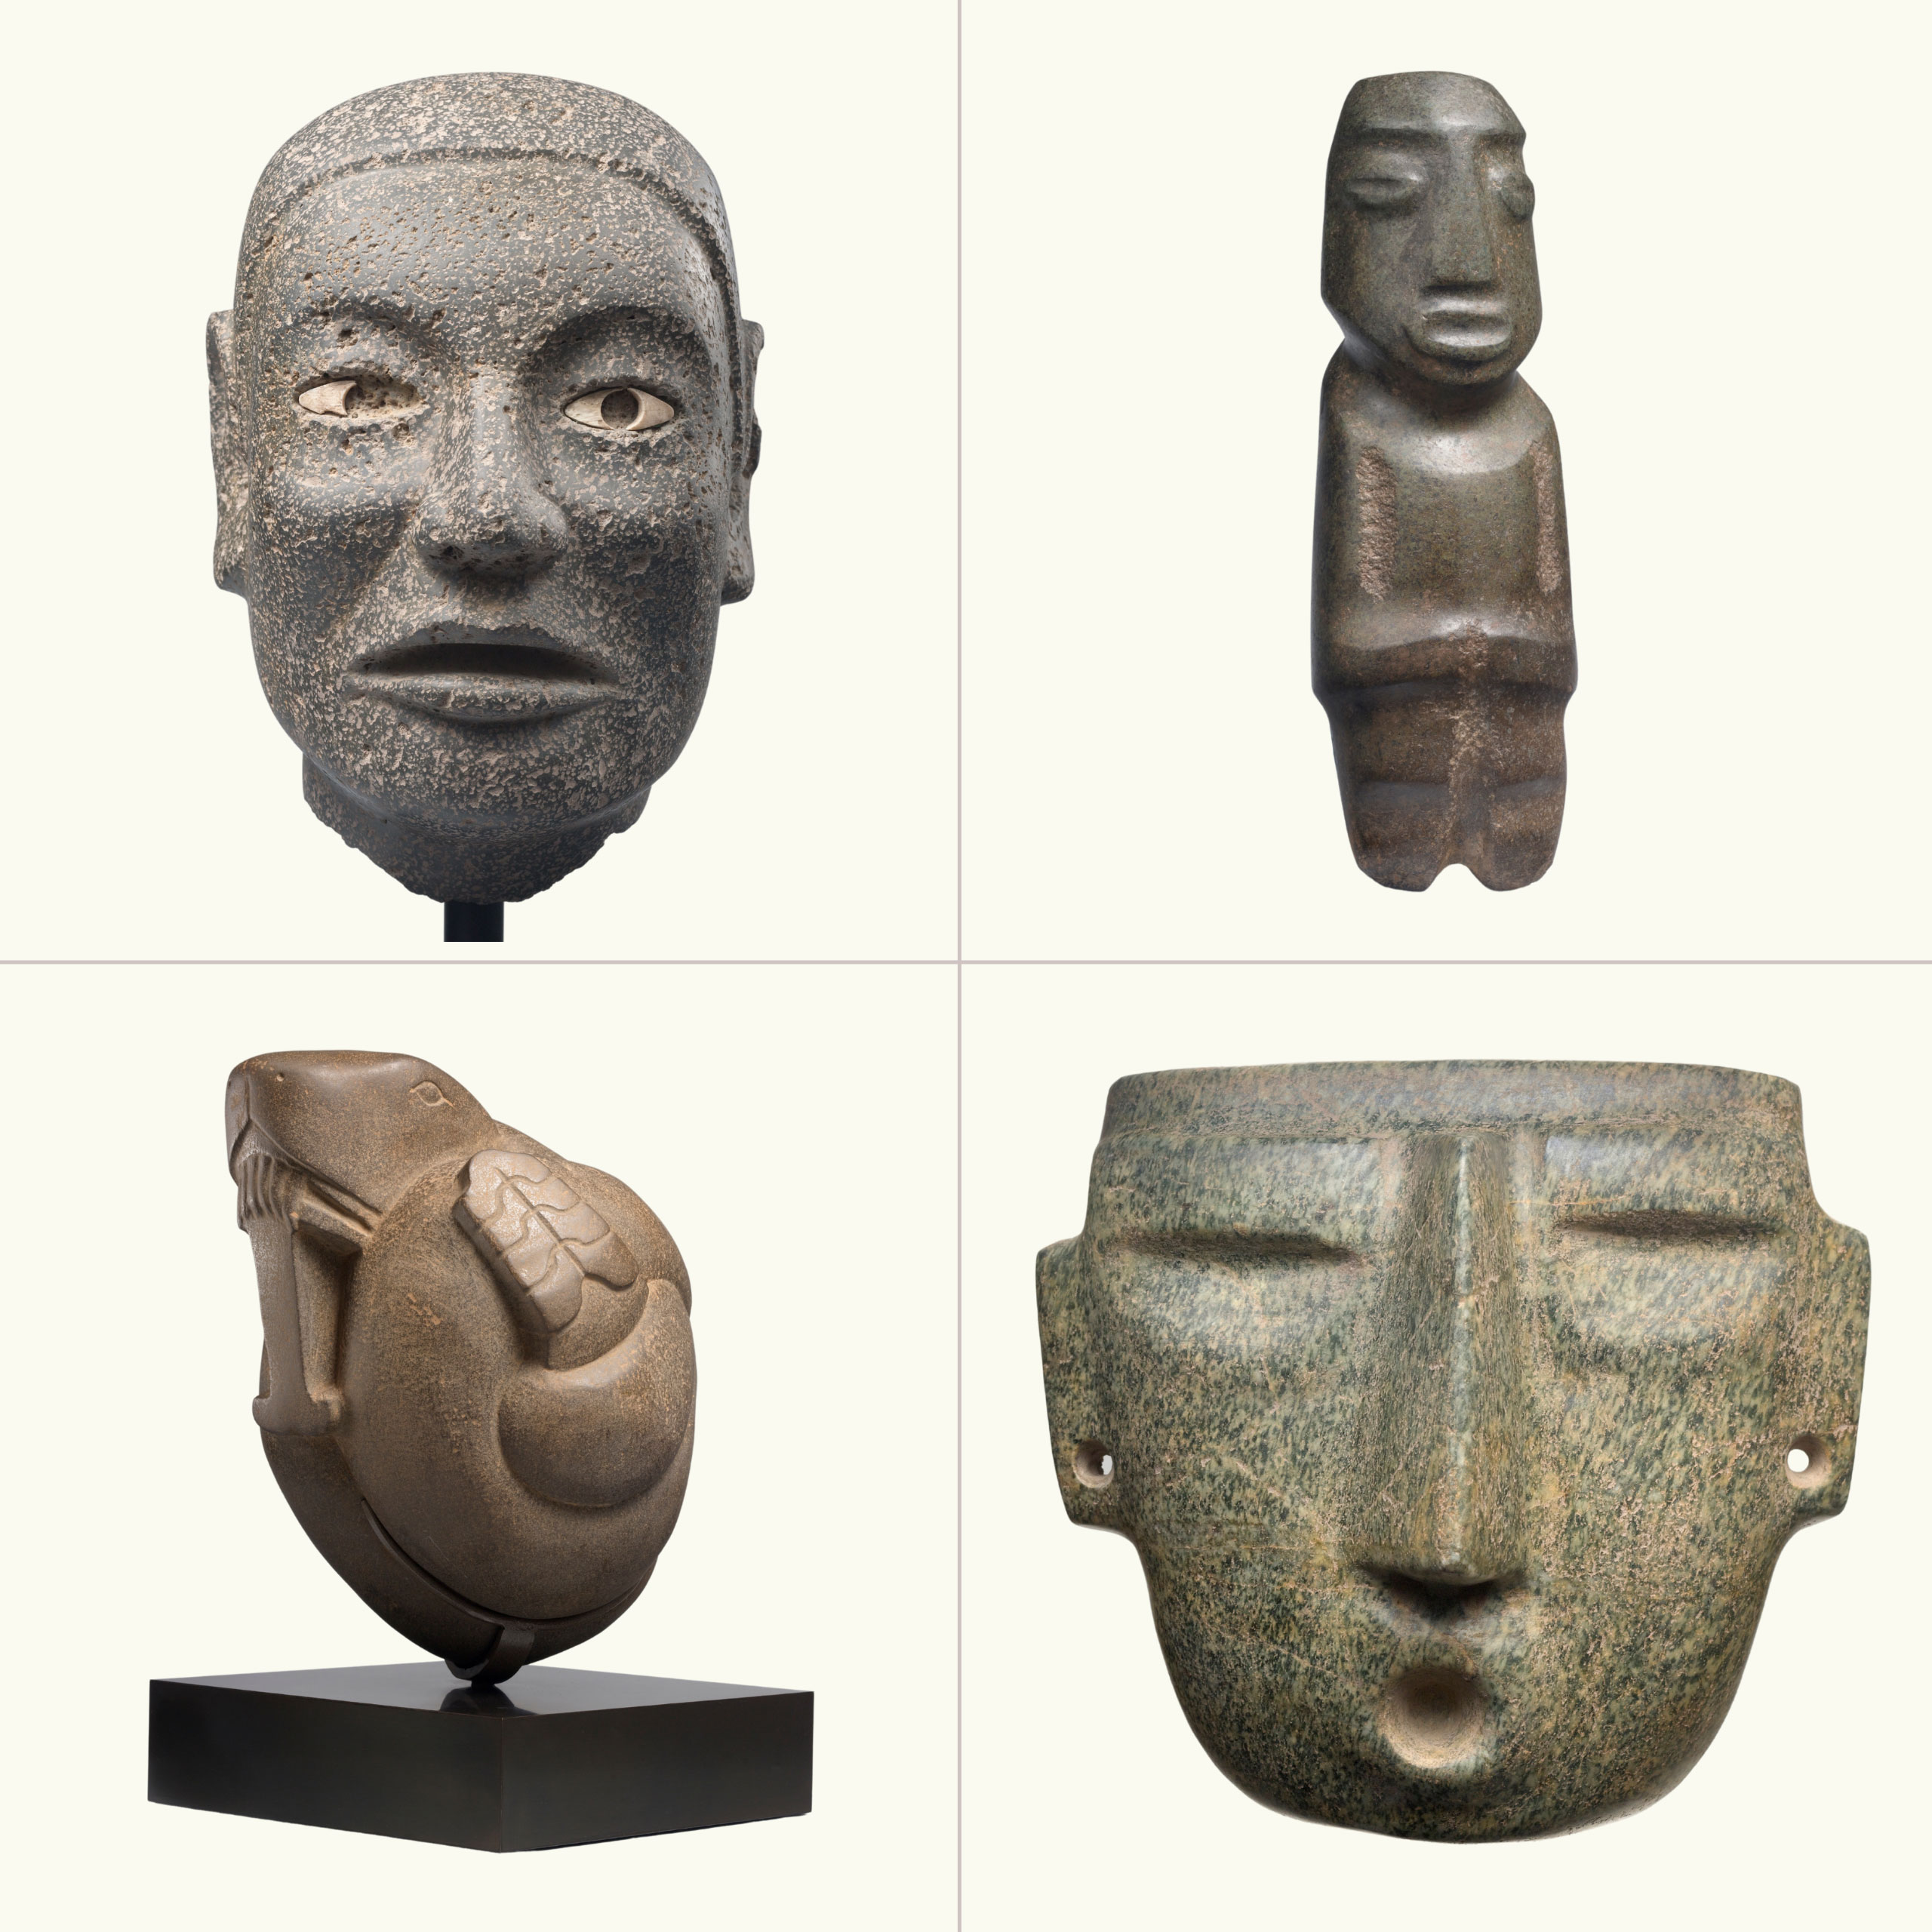 A comparison of 4 objects: 1. A basalt life-sized head with facial features, 2. A dark-green standing figure made of diorite, 3. a coiled brown rattlesnake made of mottled volcanic stone, and 4. A pale green mask made of mottled stone.